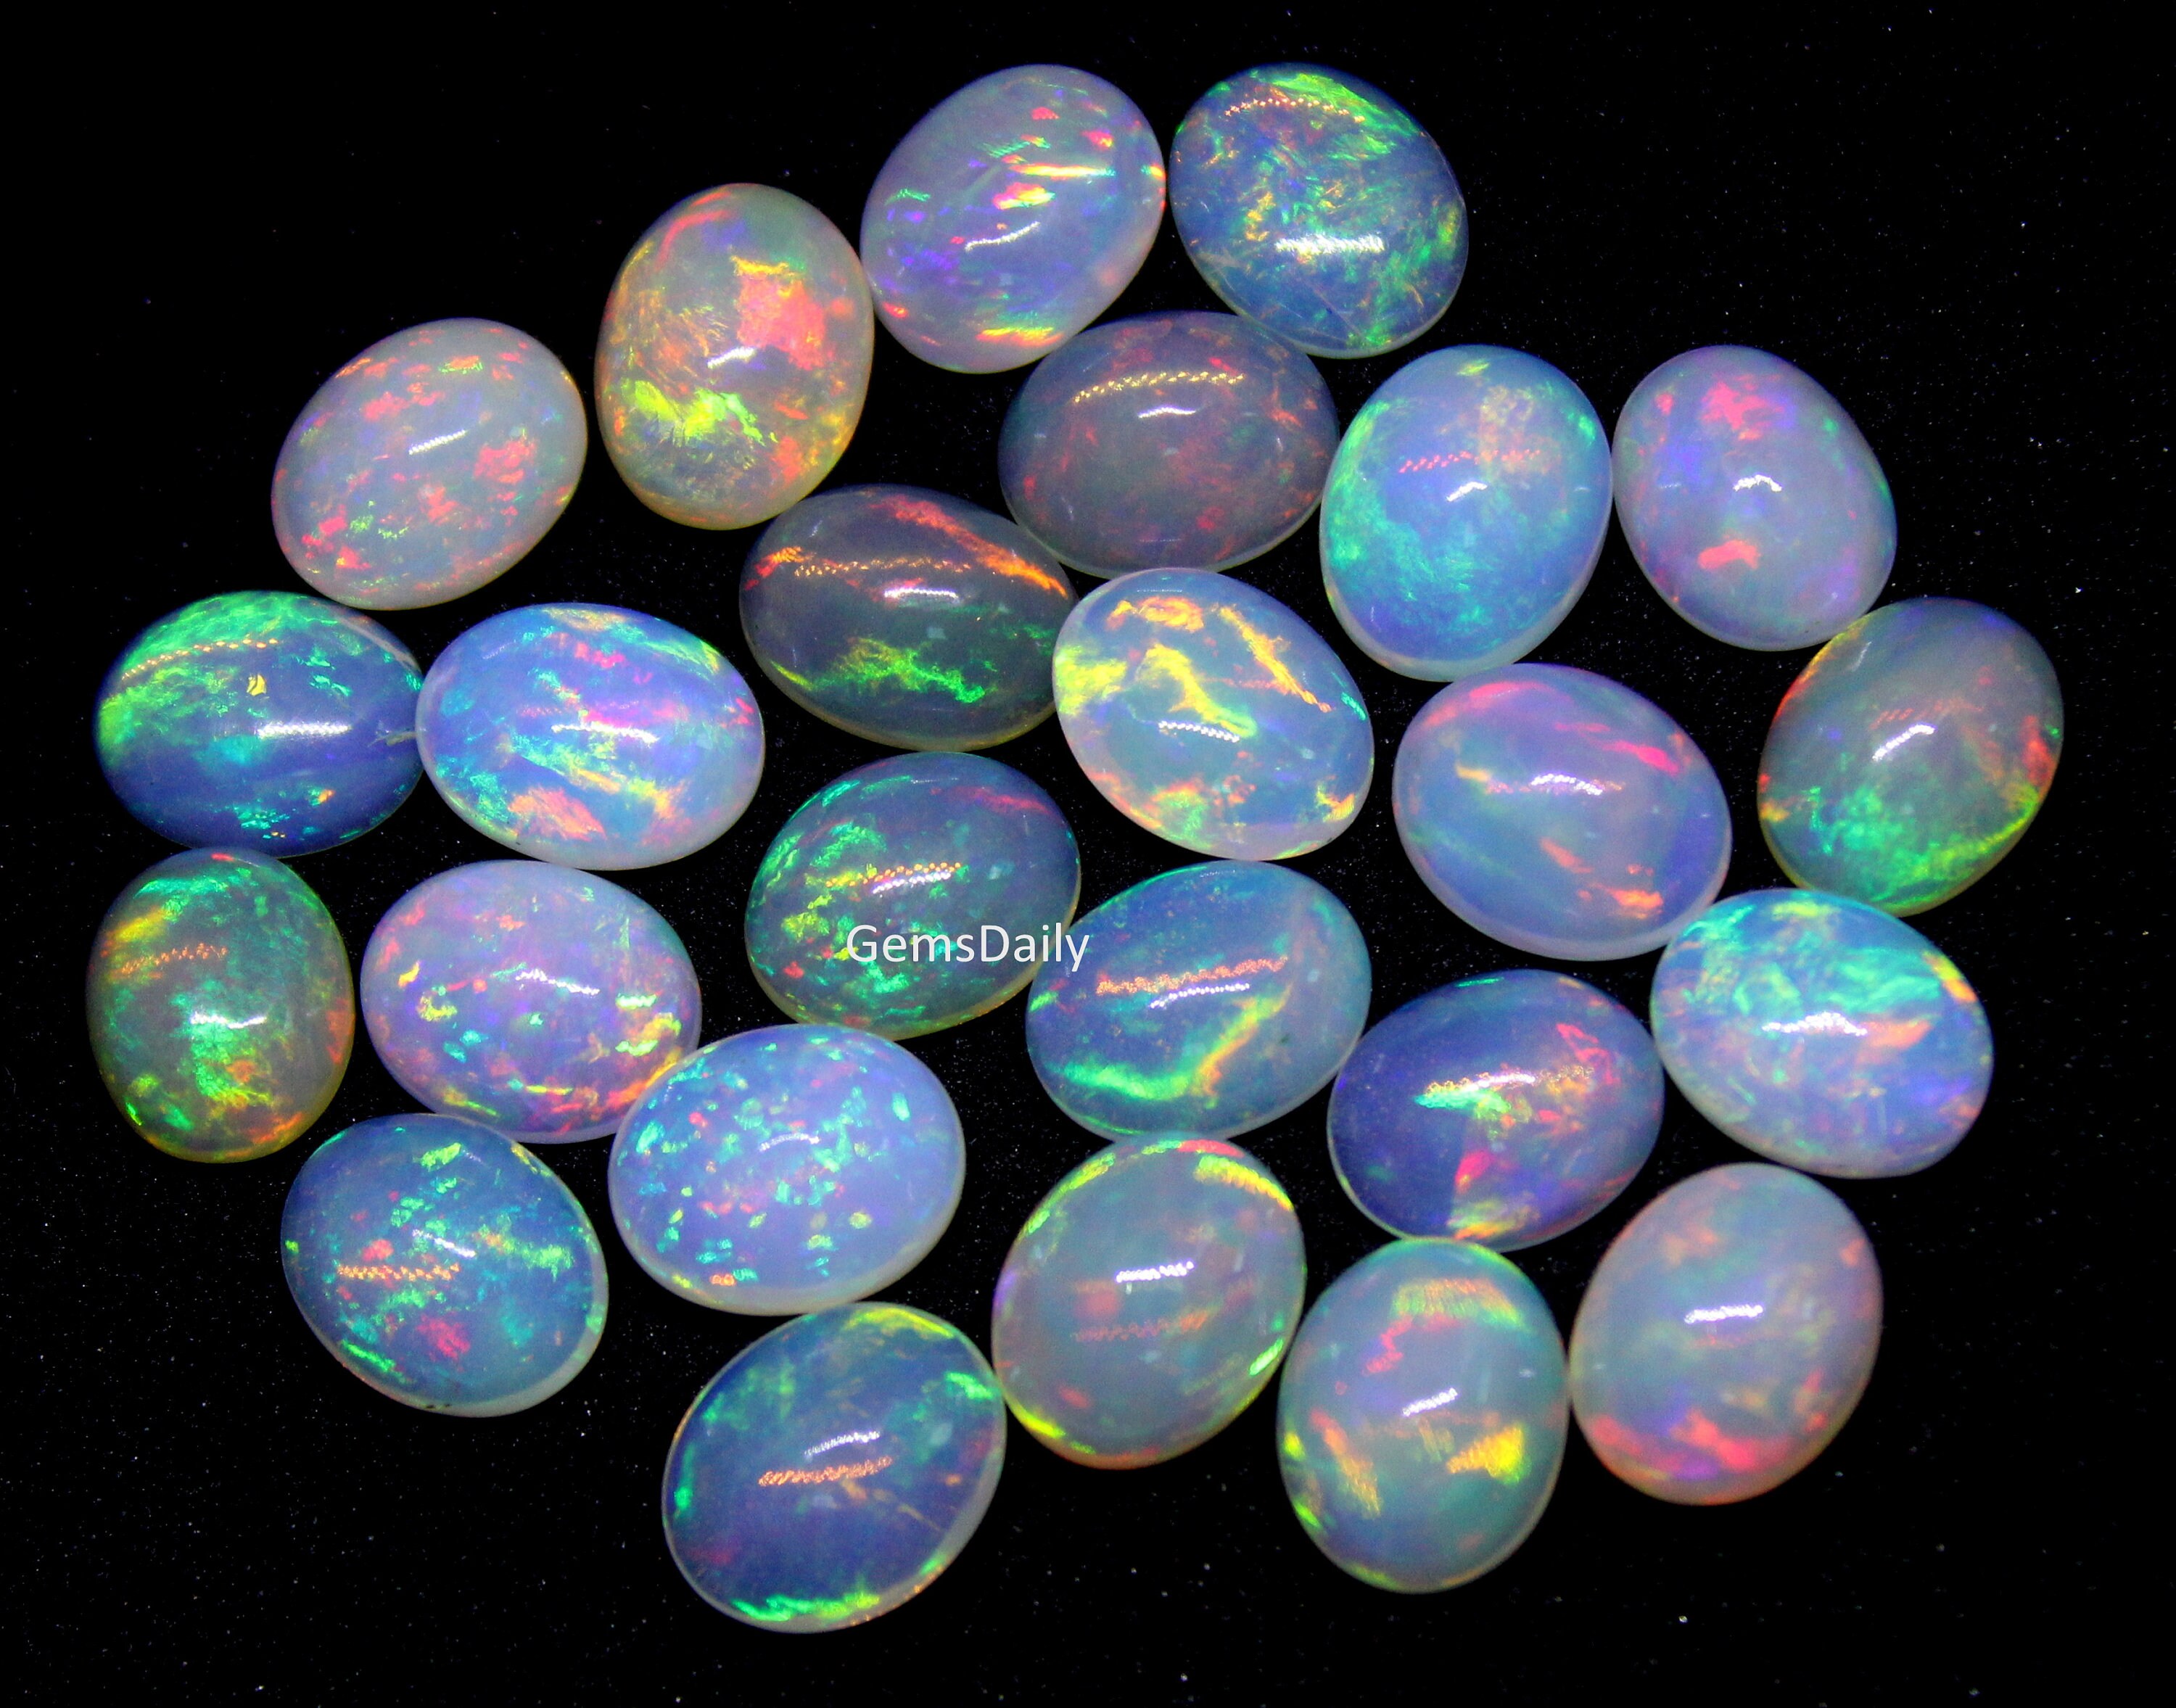 4x3 to 5x4 mm For Making Jewelry Q-4207 8 Ct 1Piece 1 USD AAA Oval  Shape Gemstone Unique Multi Ethiopian Opal Smooth Loose Gemstone